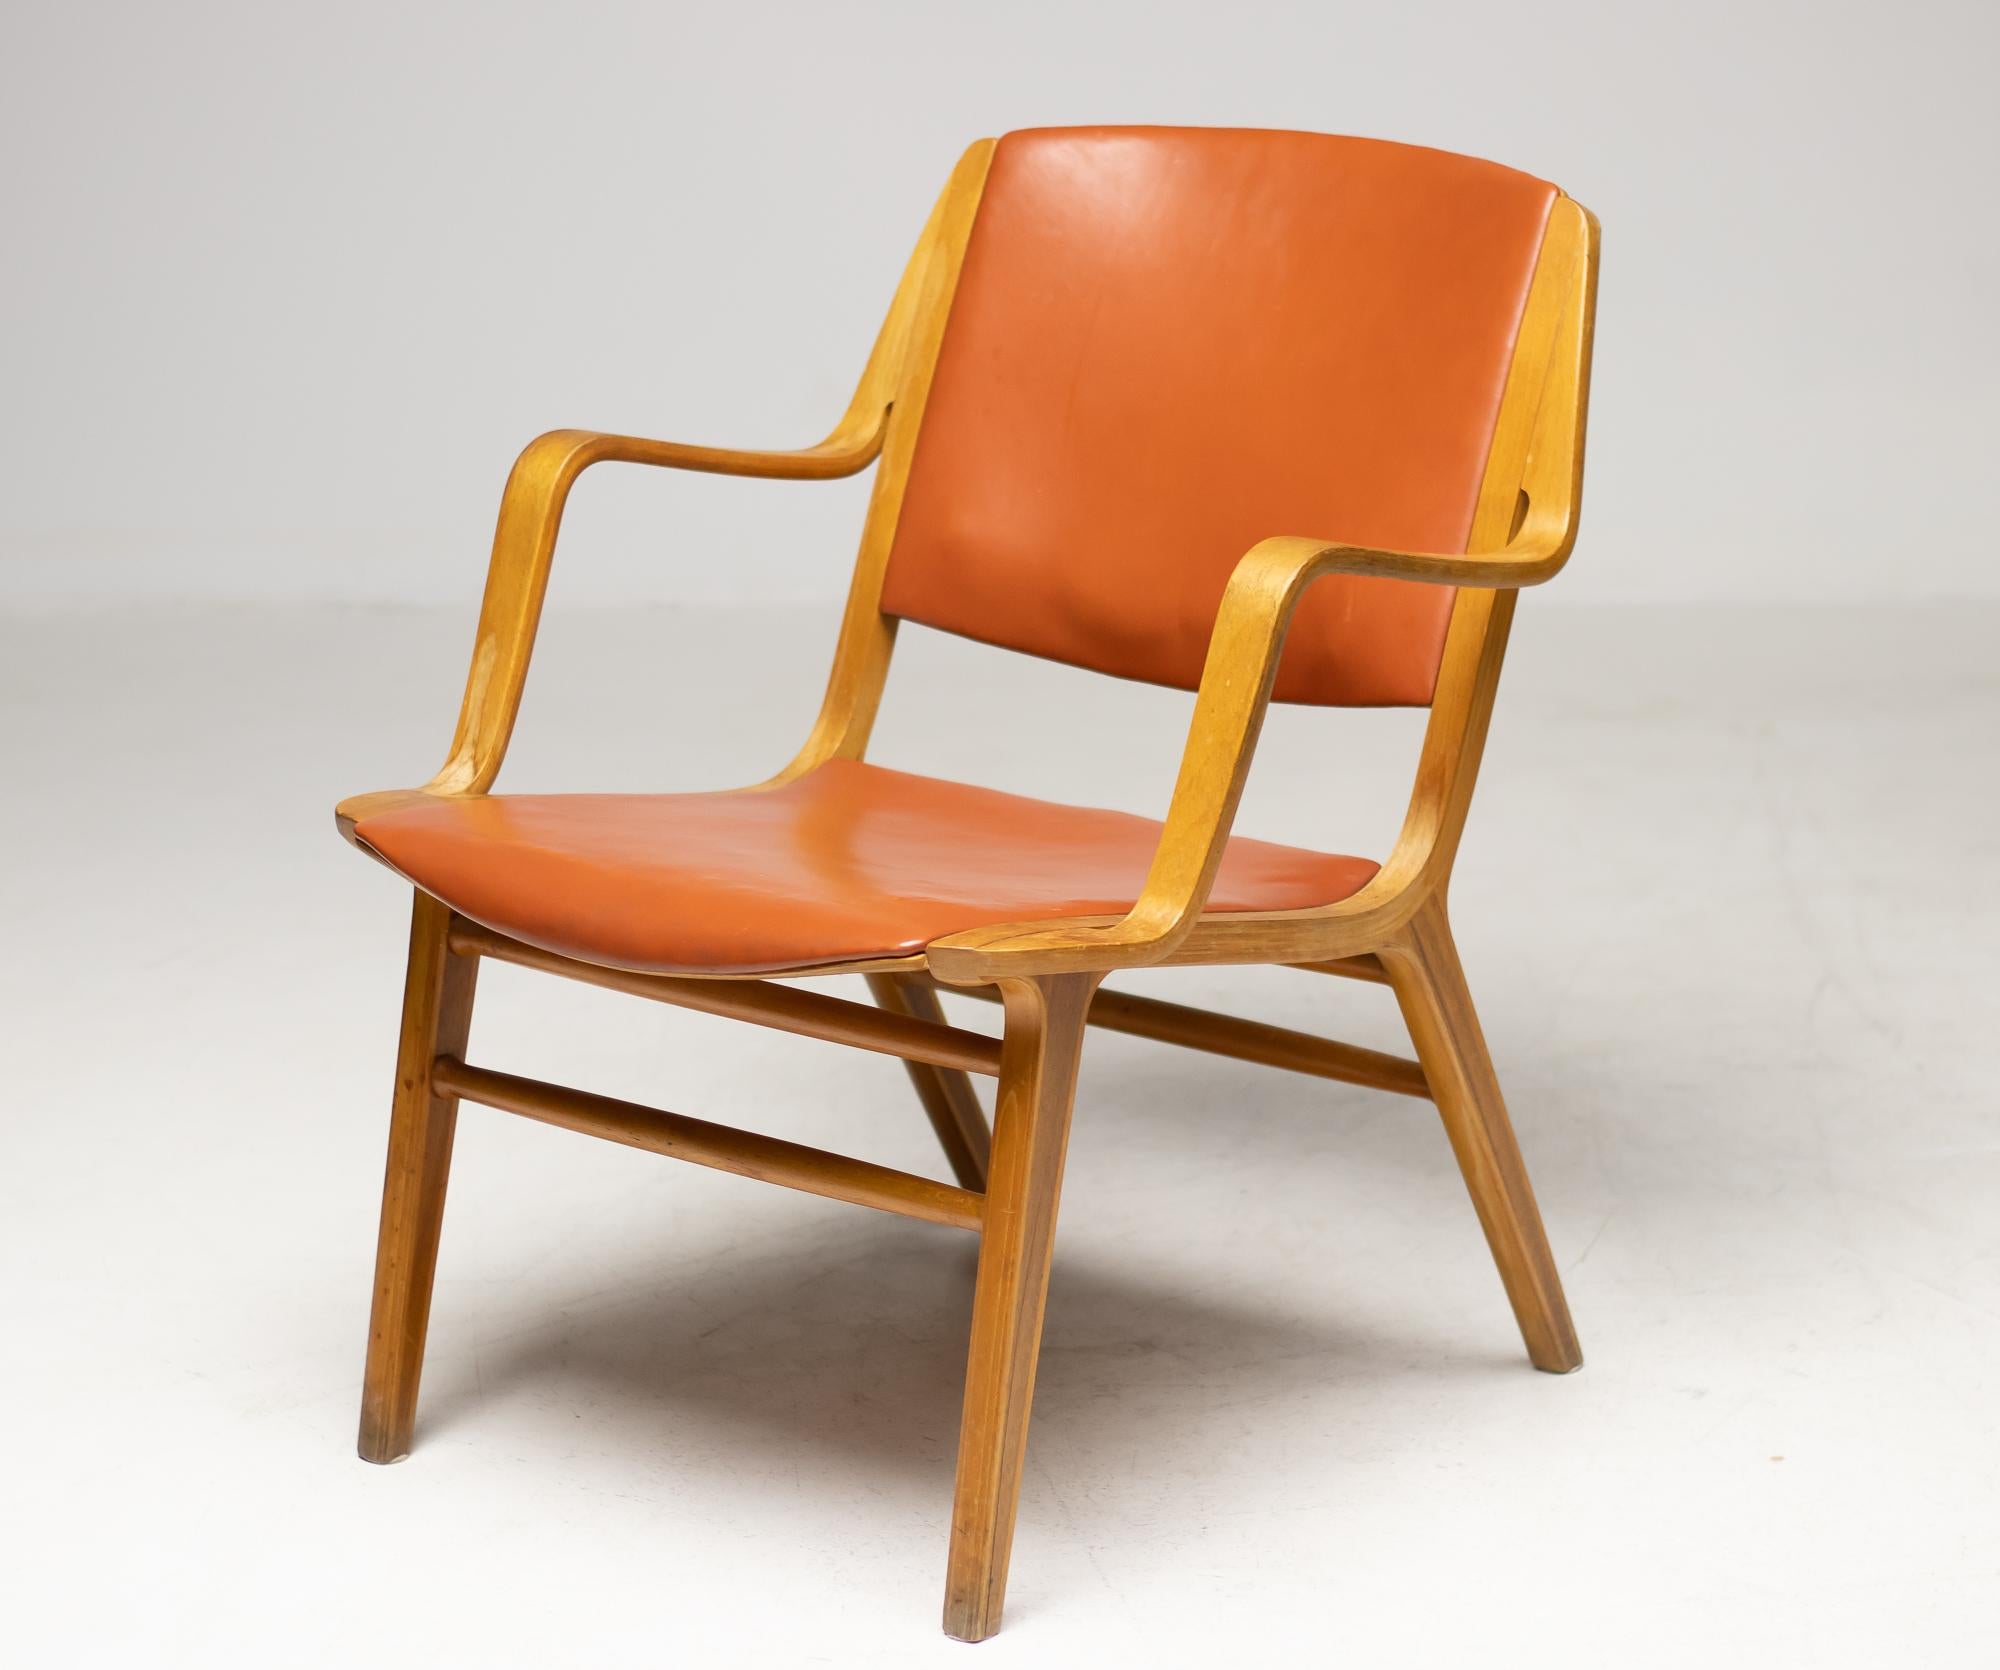 Armchair designed by Peter Hvidt and Orla Mølgaard–Nielsen and produced by Fritz Hansen, Denmark. The chair is press shaped in laminated beechwood, the seat is upholstered with all original orange leather. The legs feature a teak core.
An example